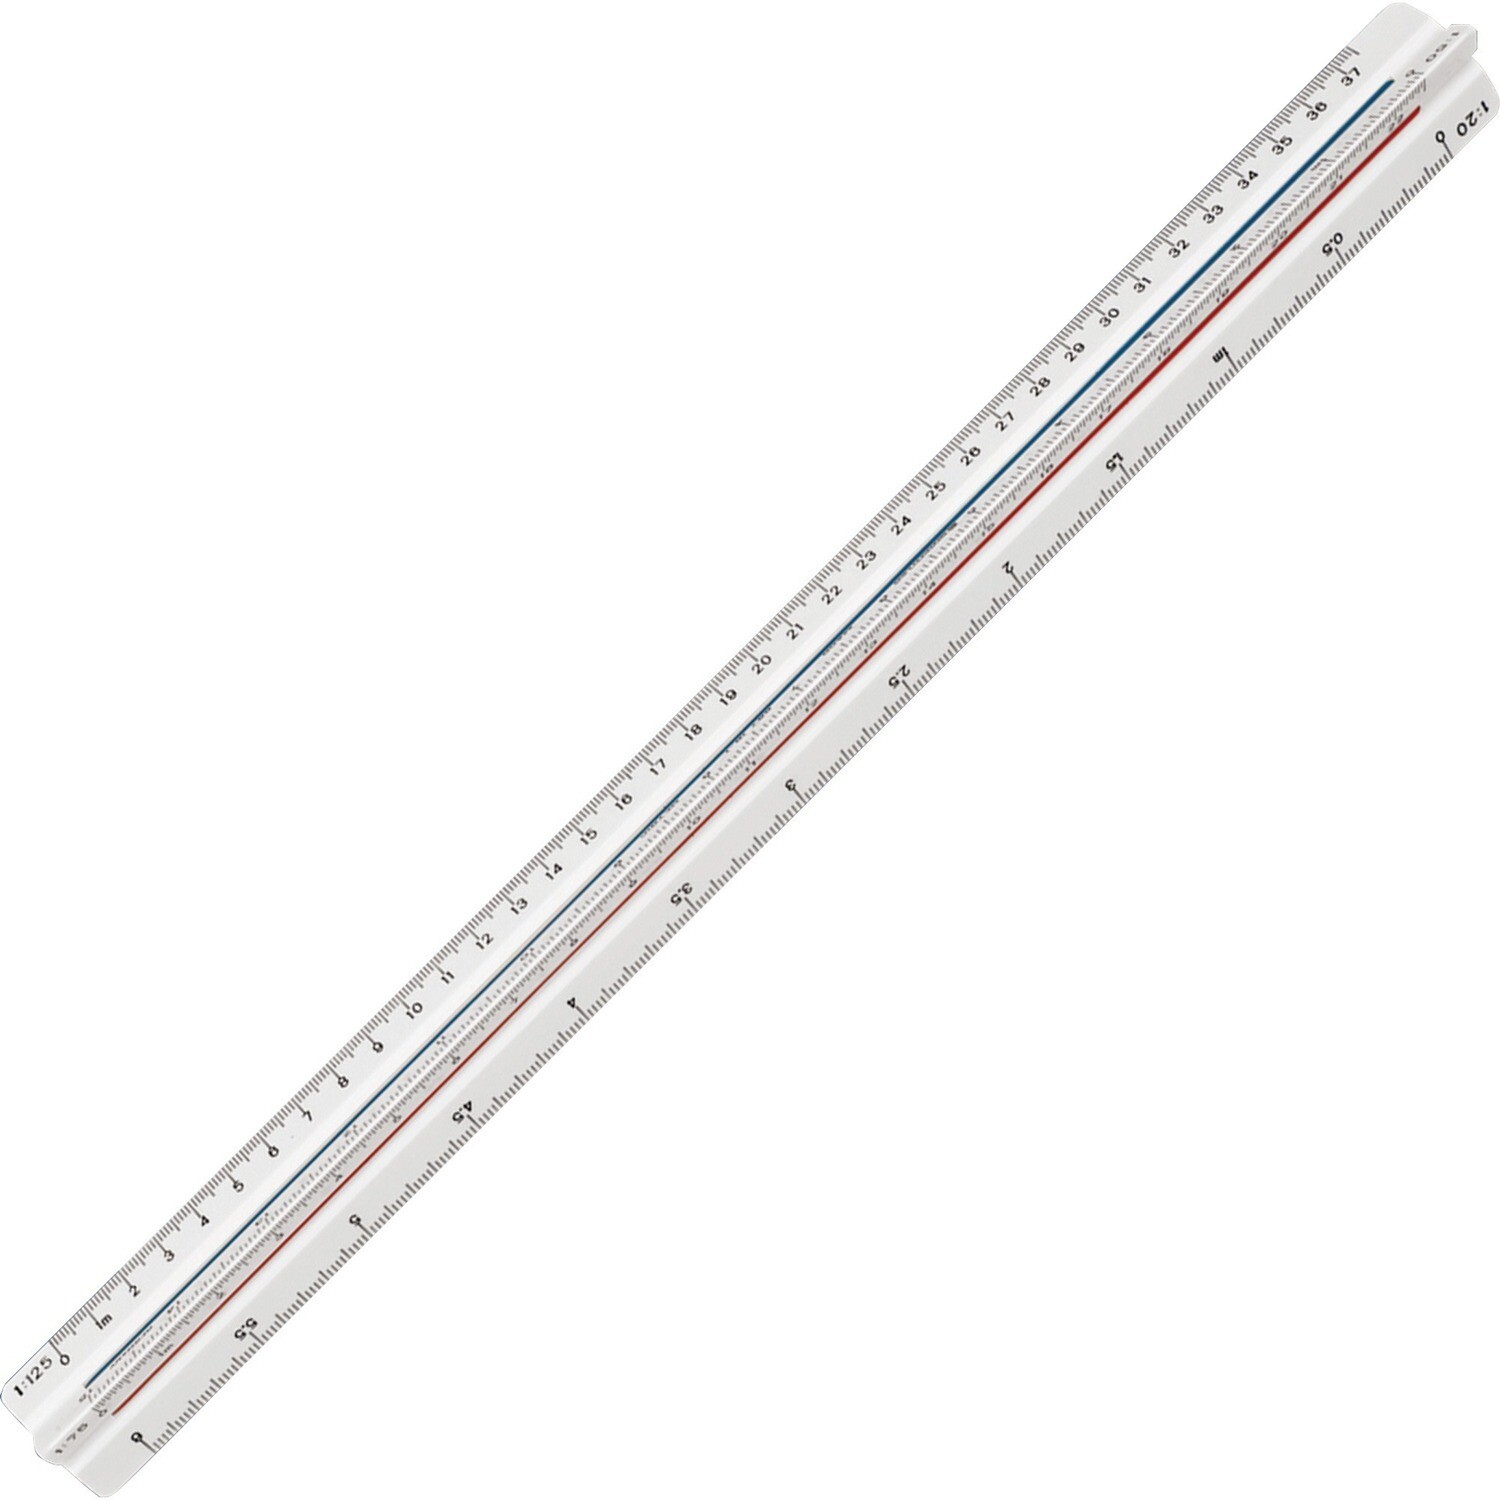 Ruler, Triangular Scale Conversion, Metric/Imperial, Staedtler